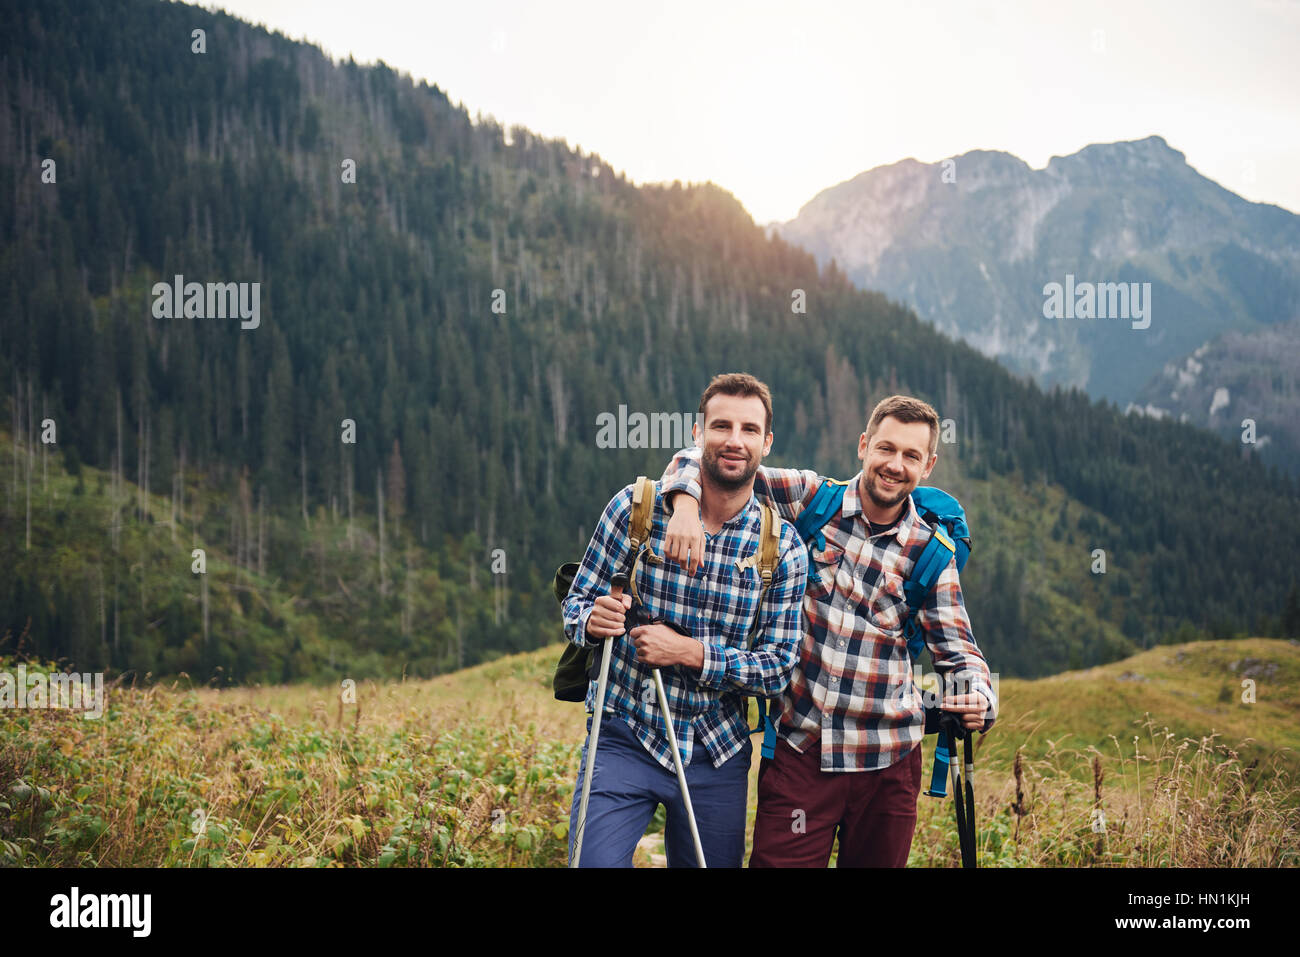 Two friends trekking together in the mountains Stock Photo